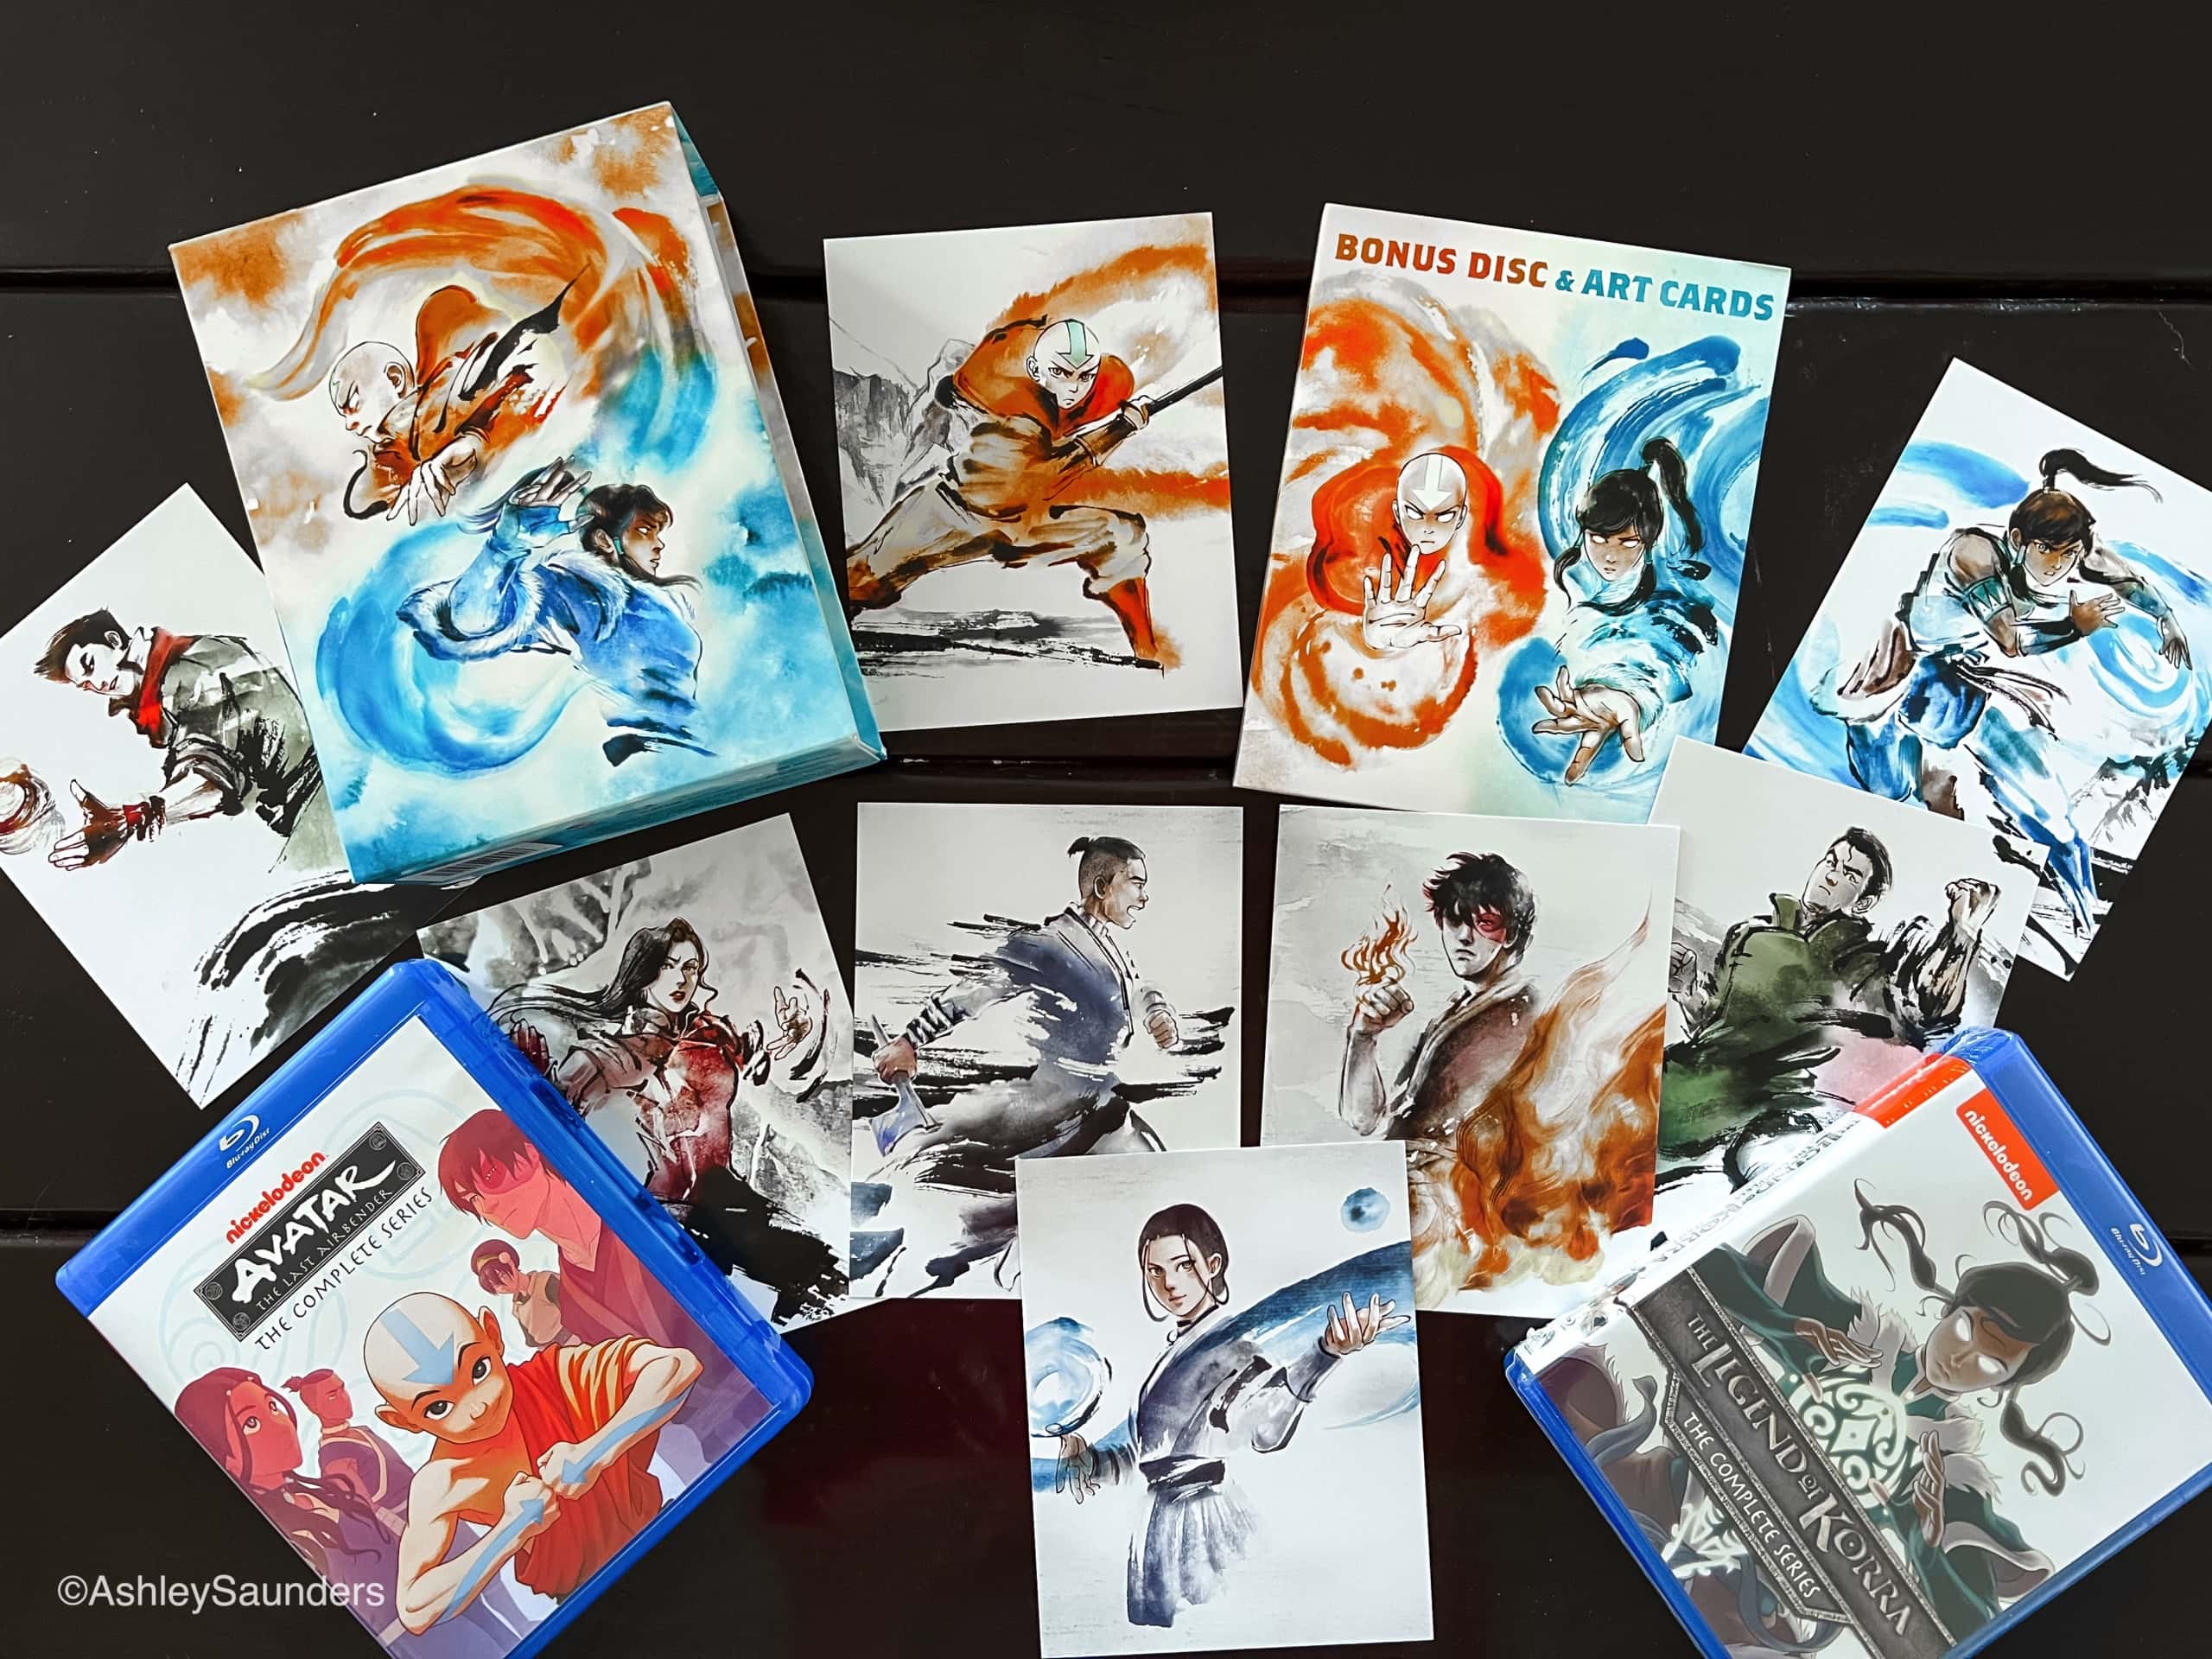 Avatar The Last Airbender  The Legend of Korra The Complete Bluray  Collection Bluray  Walmartcom